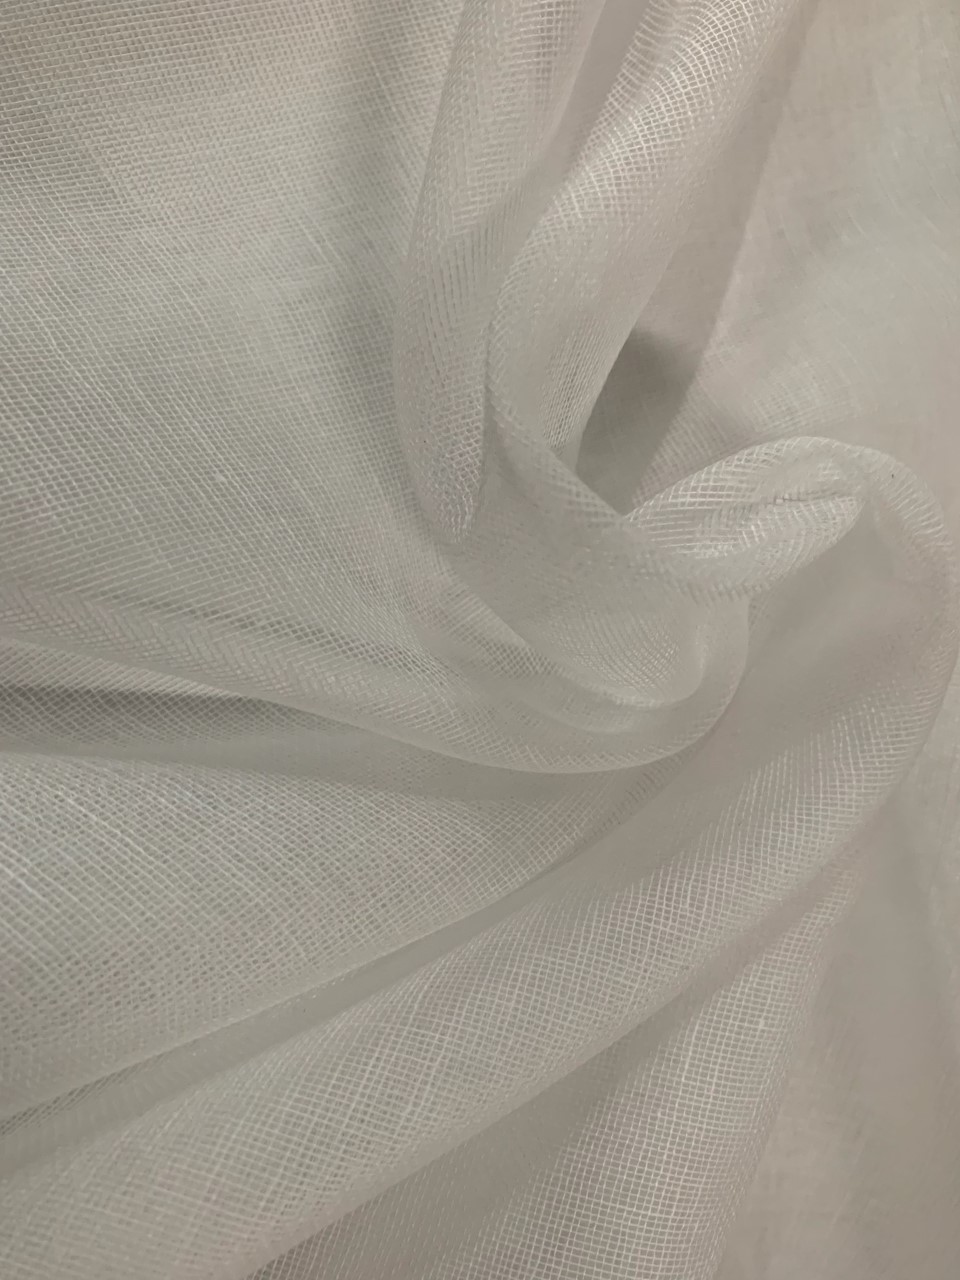 30" Grade 60 White Cheesecloth 1000 Yard Roll